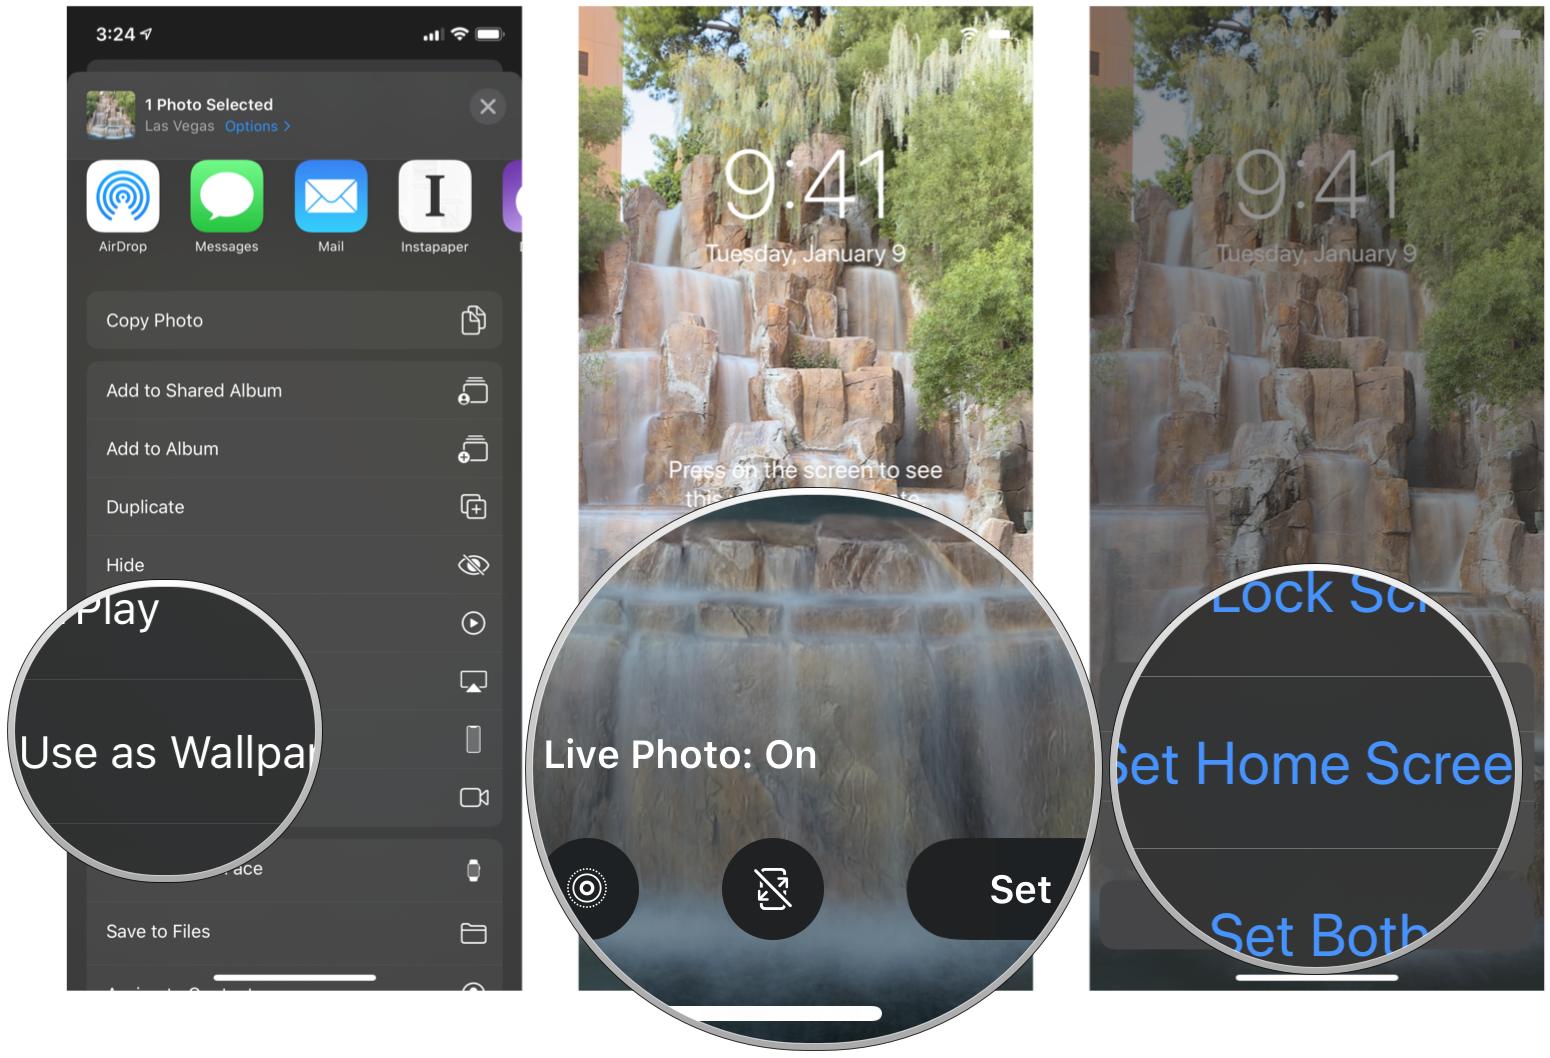 How to set a Live Photo as wallpaper on iPhone and iPad by showing steps: tap Use as Wallpaper, make adjustments and tap Set, then choose which screen to set it for